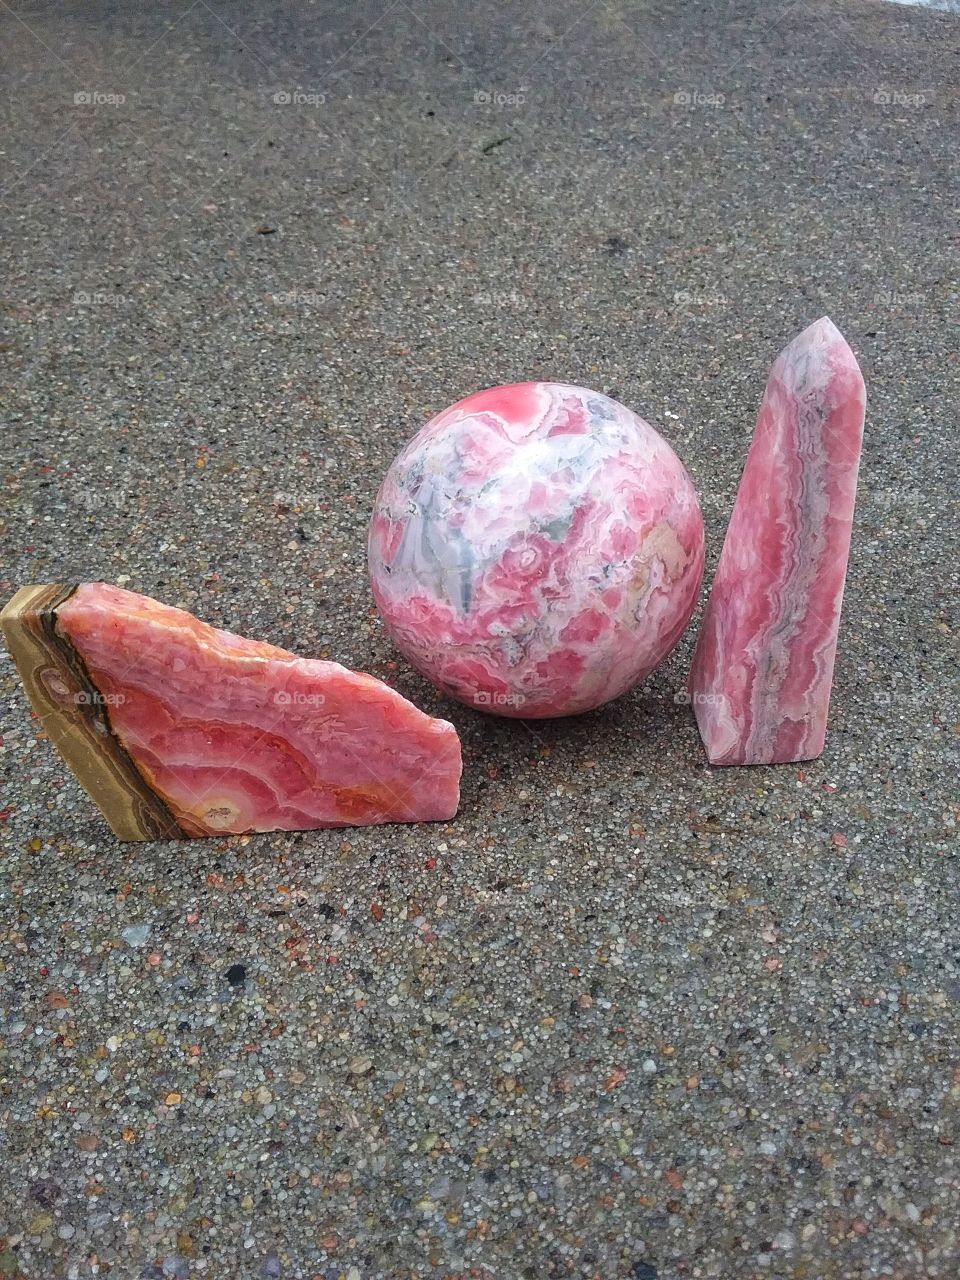 Rhodochrosite
Left to Right:
Rhodochrosite Stalactite Slice, Rhodochrosite Crystal Sphere, Rhodochrosite Tower.
The pink is just so beautiful!